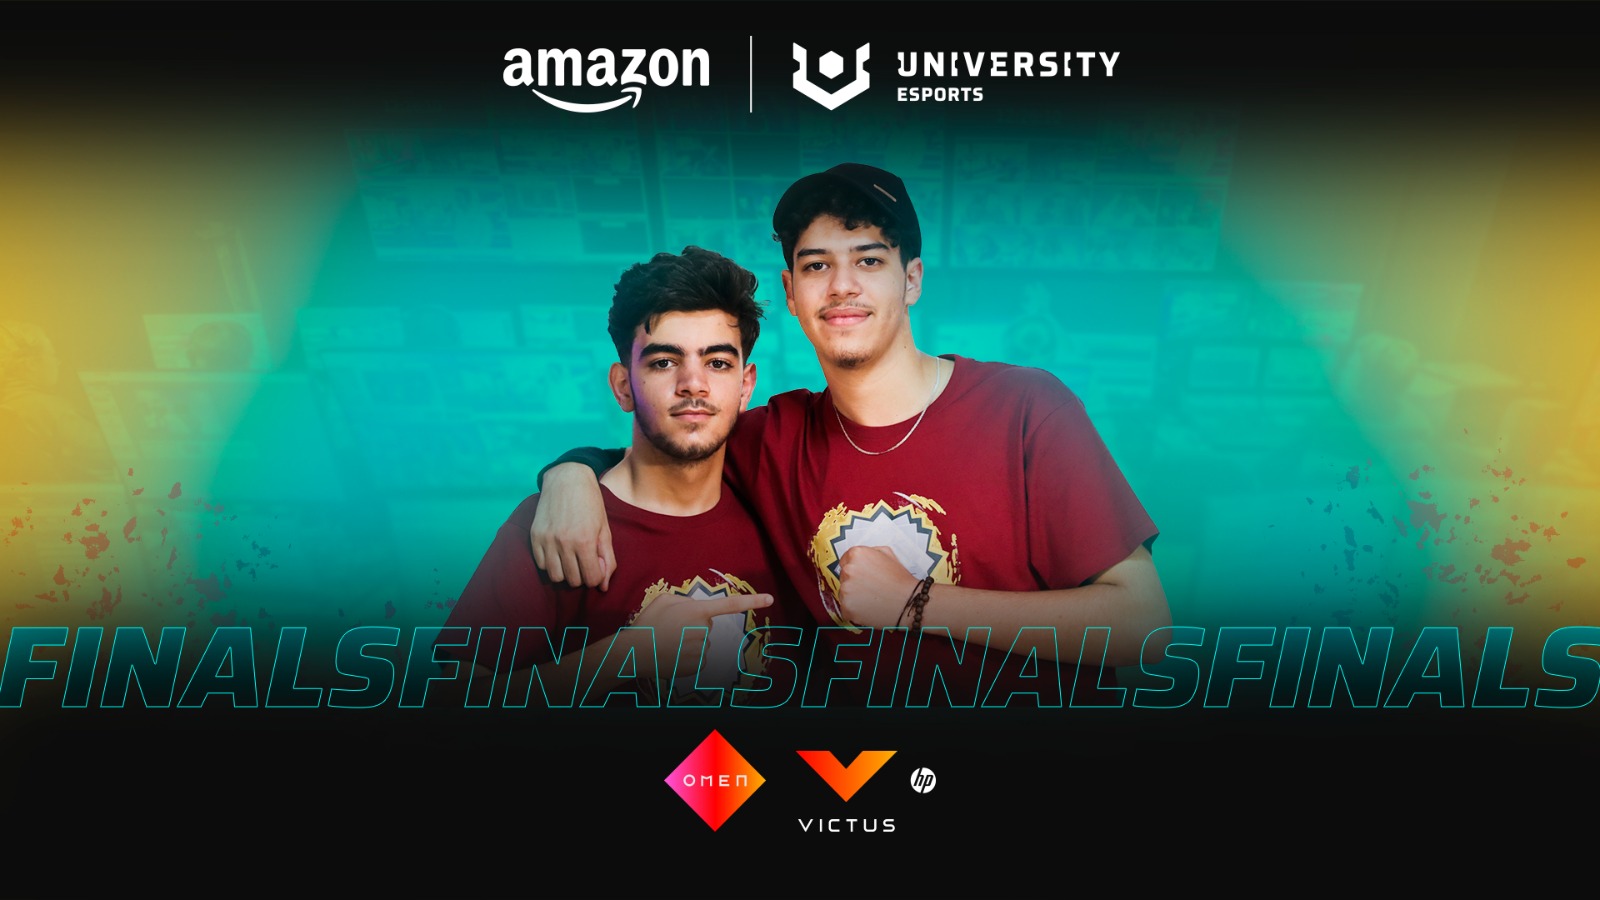 Amazon UNIVERSITY Esports competition Season 2 Spring Split concludes with more than 850 players from over 40 UAE universities